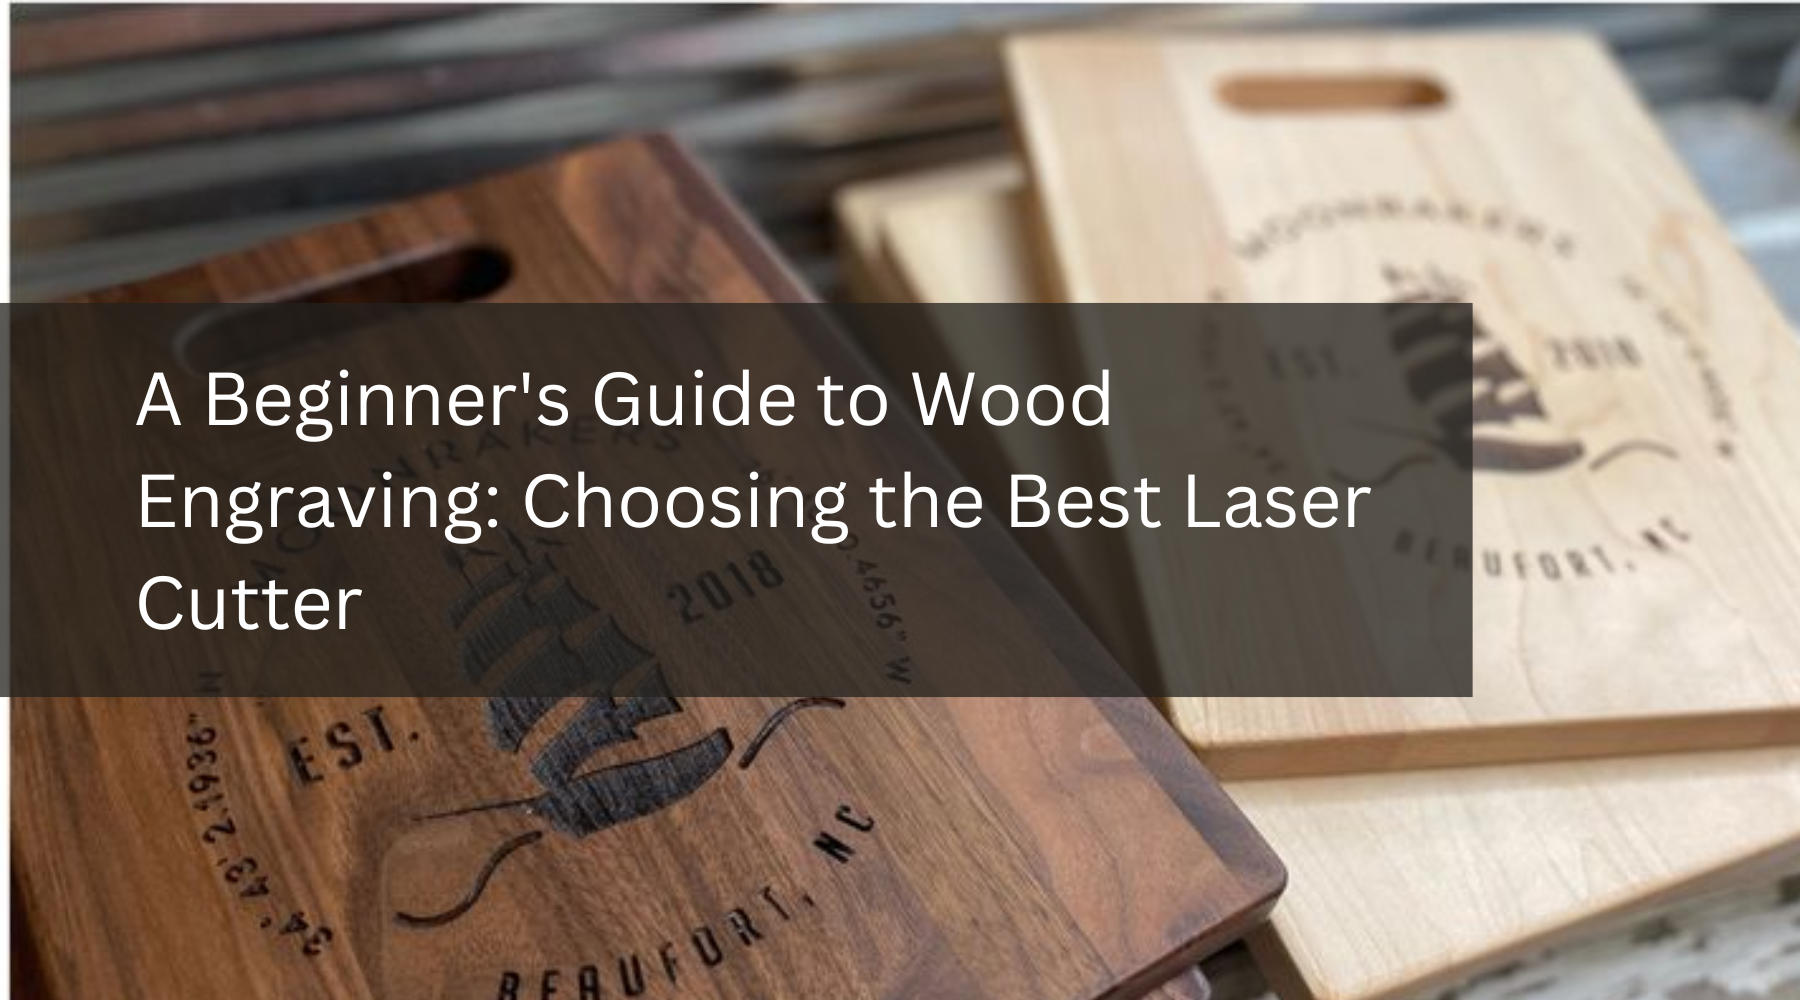 A Beginner's Guide to Wood Engraving: Choosing the Best Laser Cutter